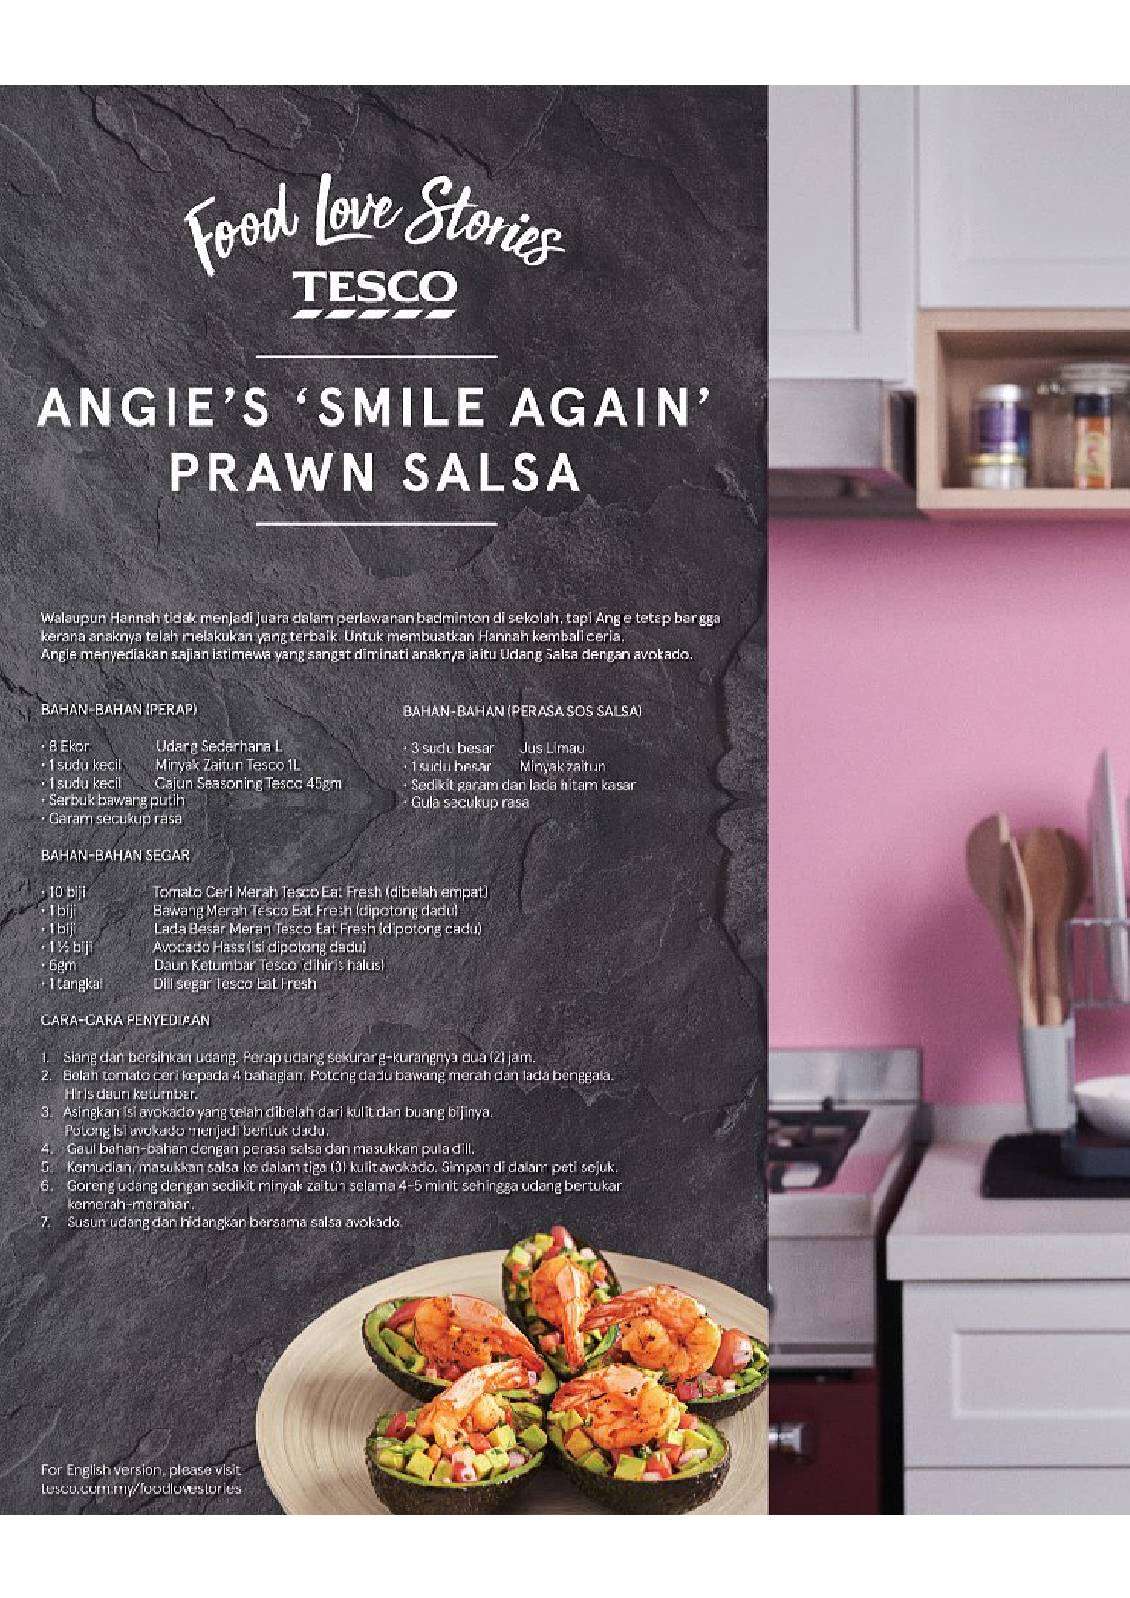 Tesco Malaysia Weekly Catalogue (14 March 2019 - 20 March 2019)